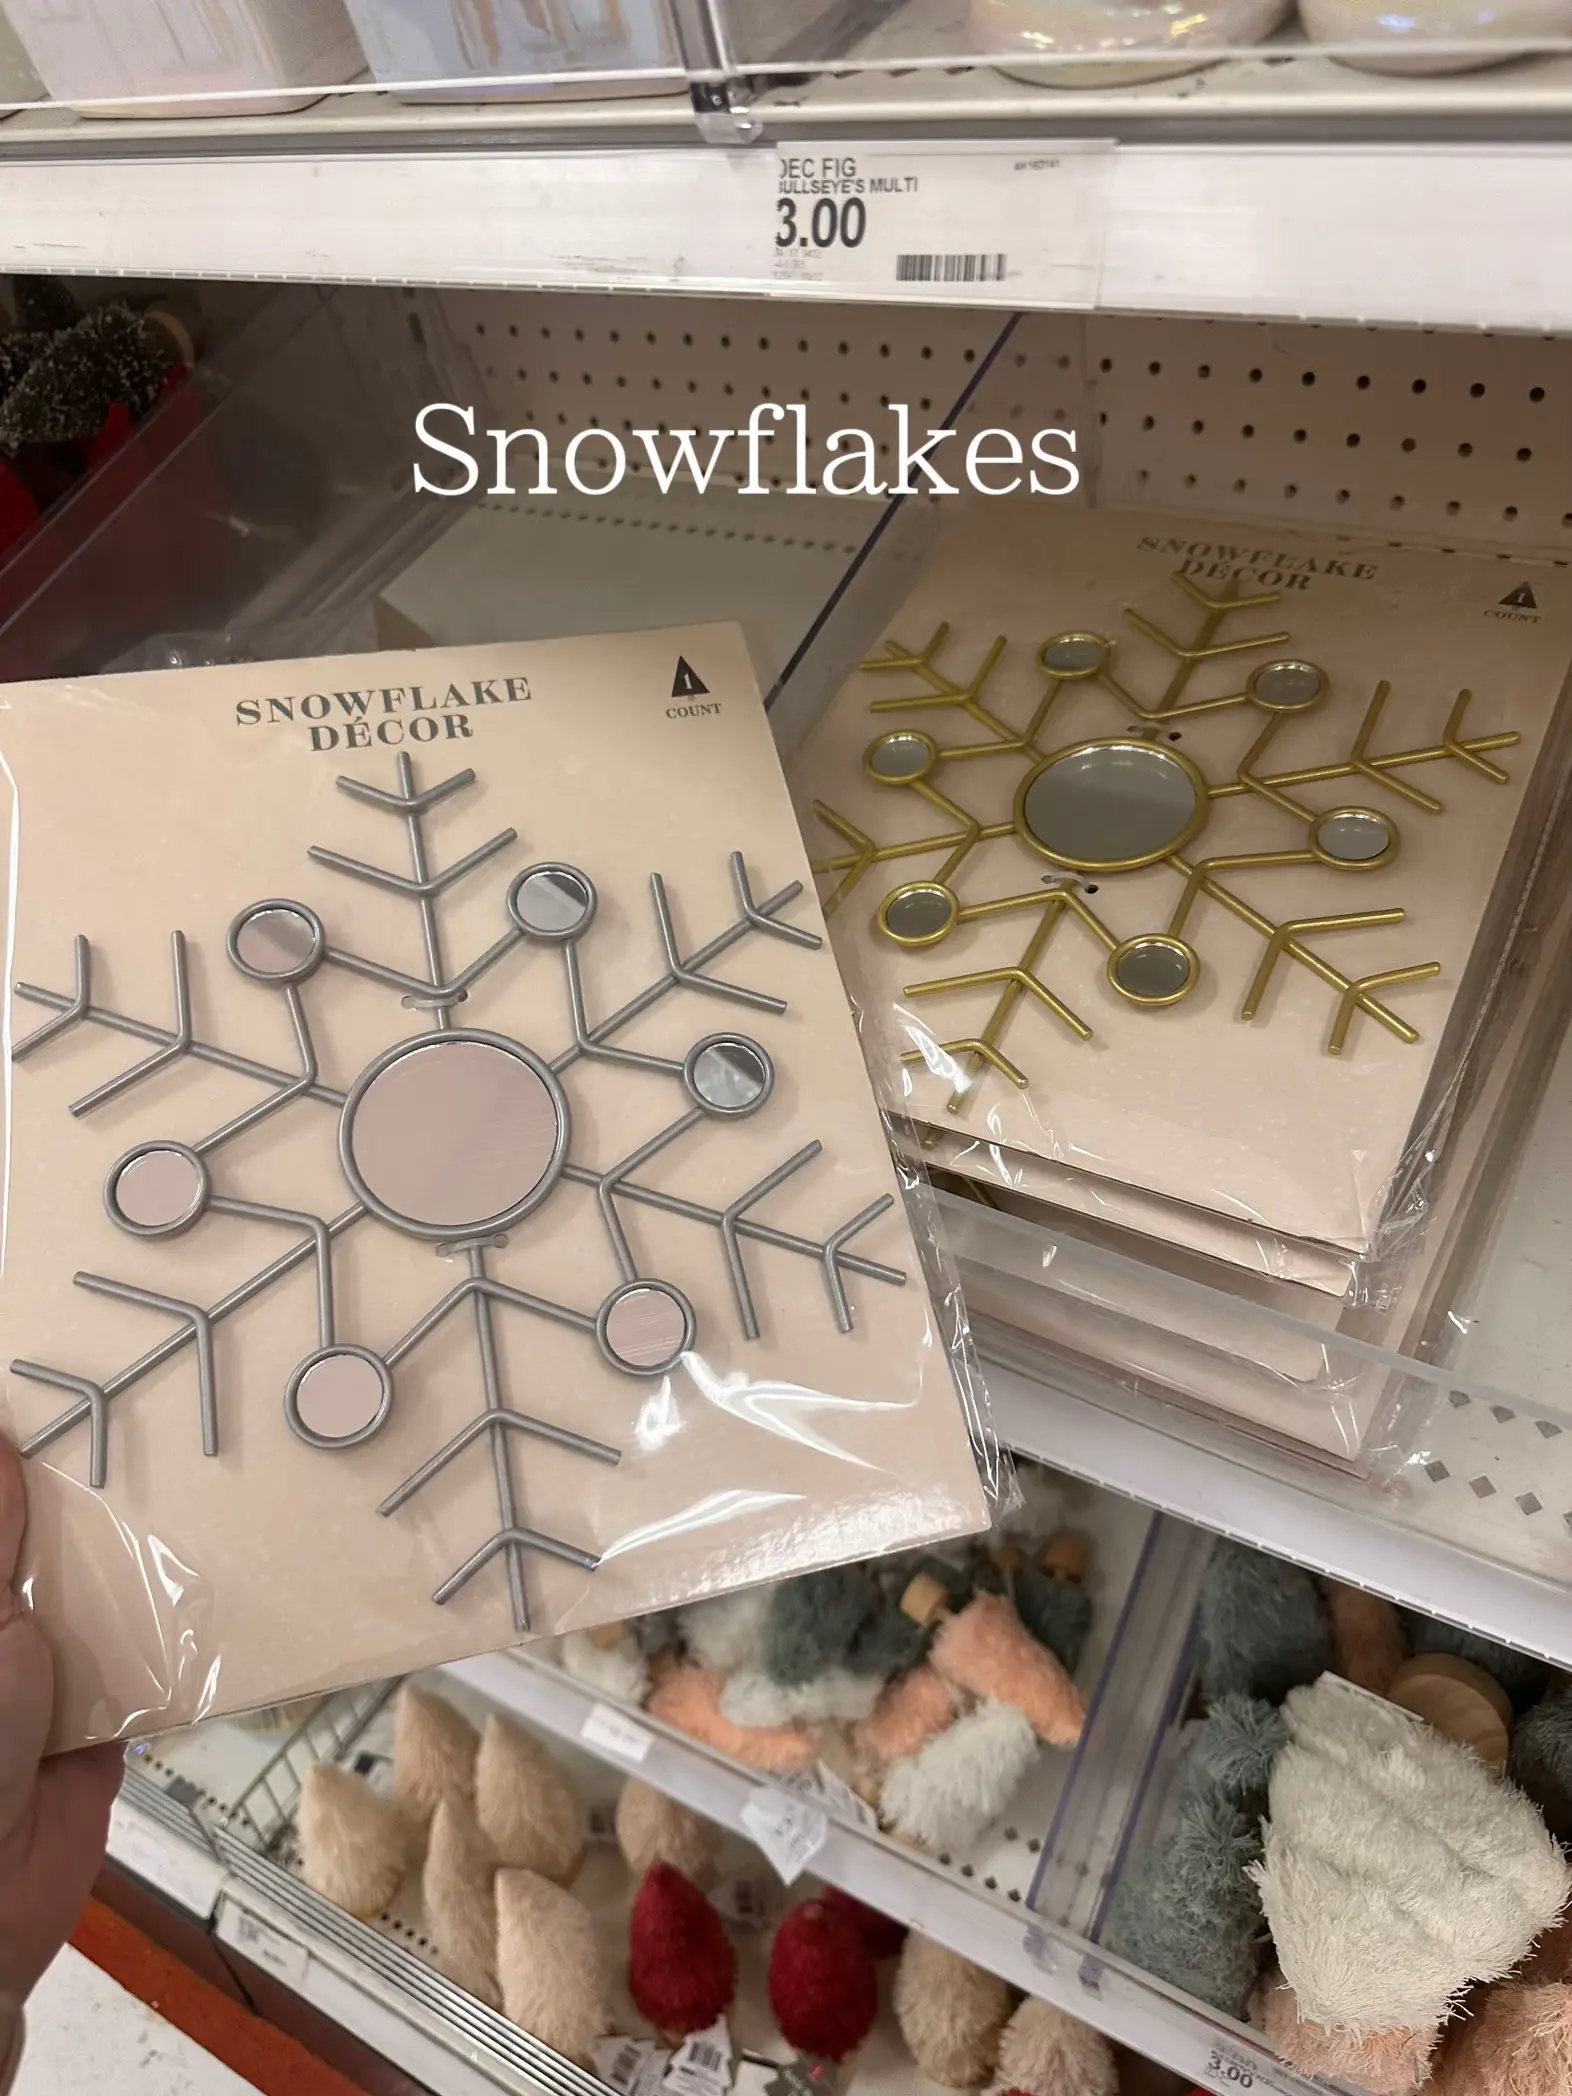  Two pieces of paper with snowflakes on them.